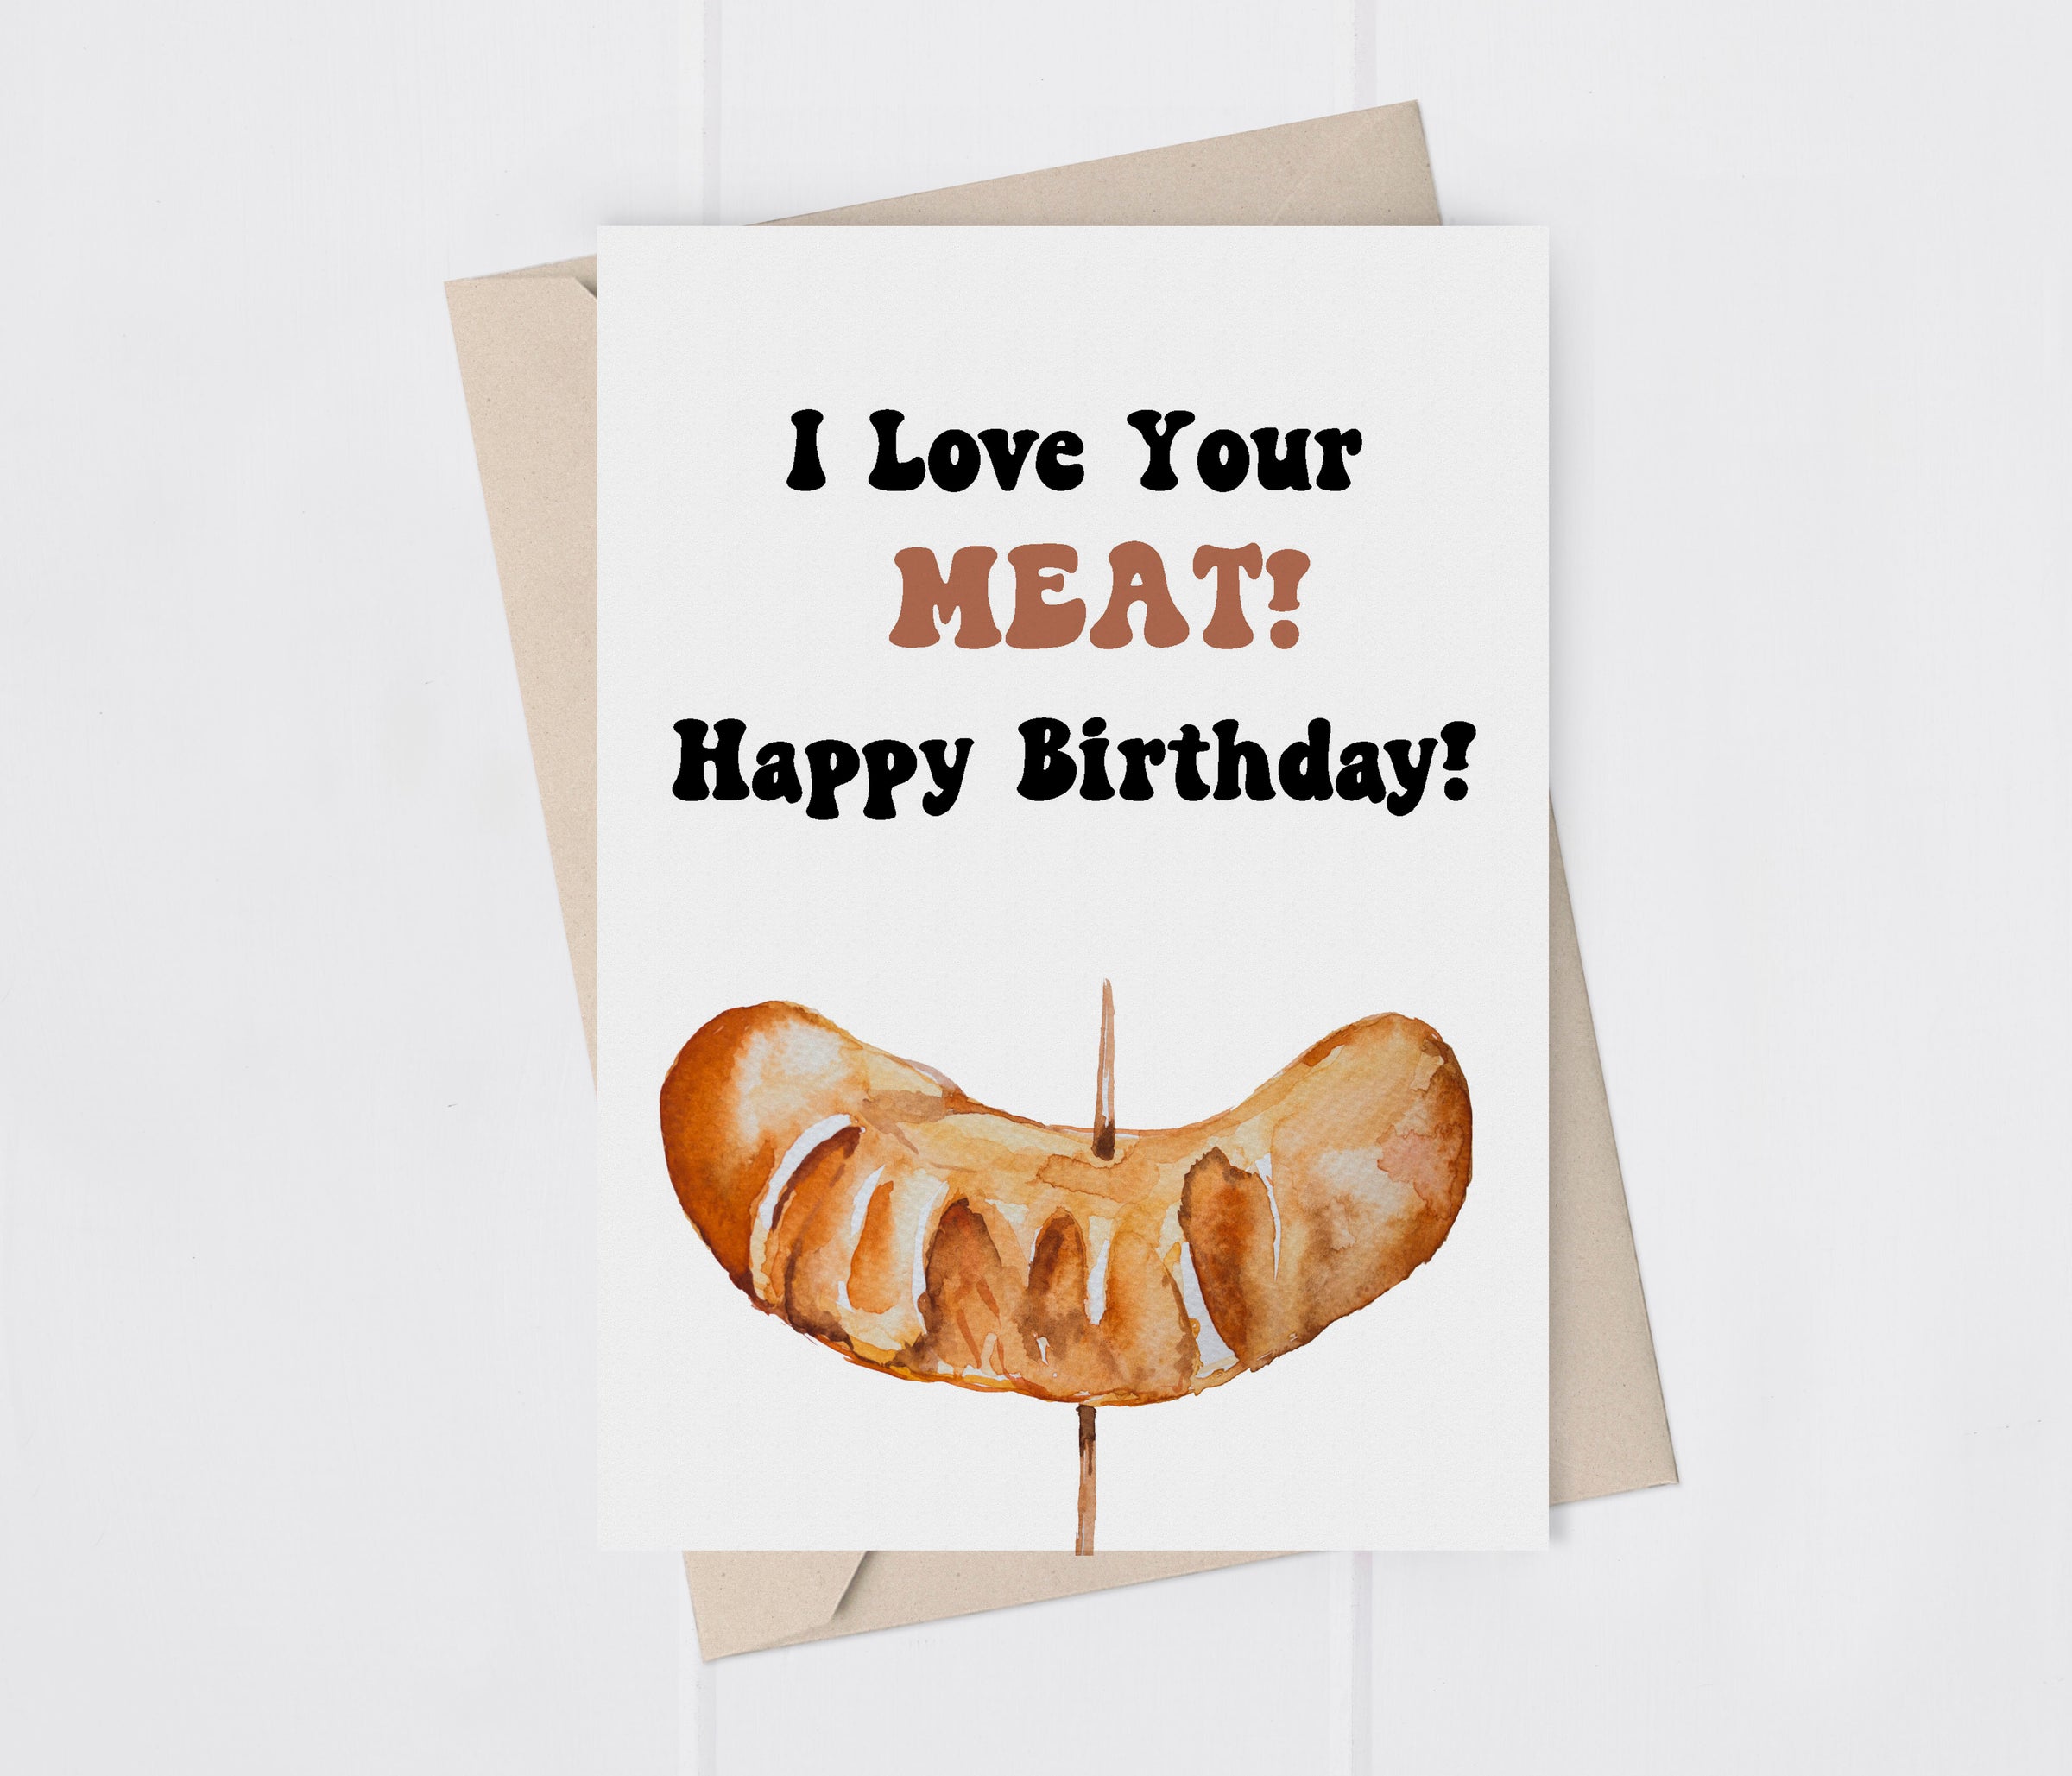 I LOVE YOUR MEAT BIRTHDAY